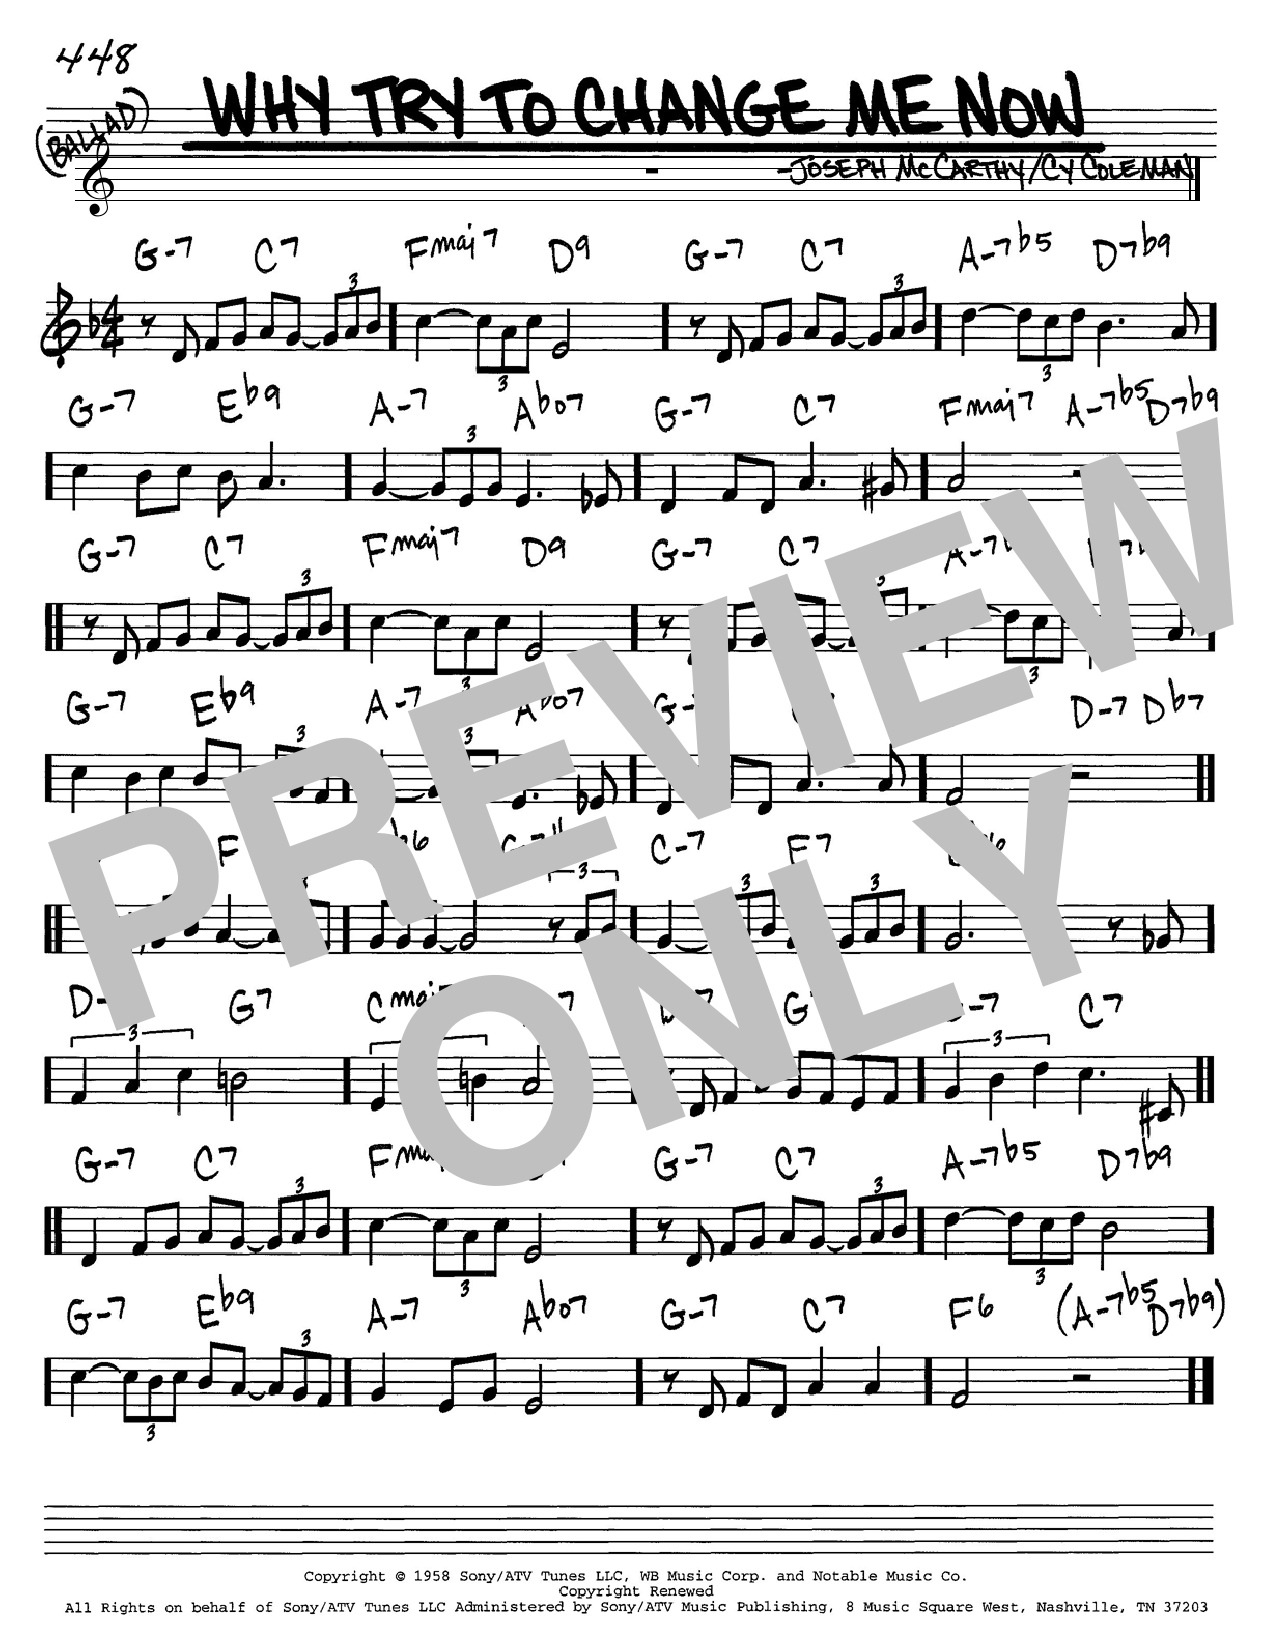 Why Try To Change Me Now sheet music